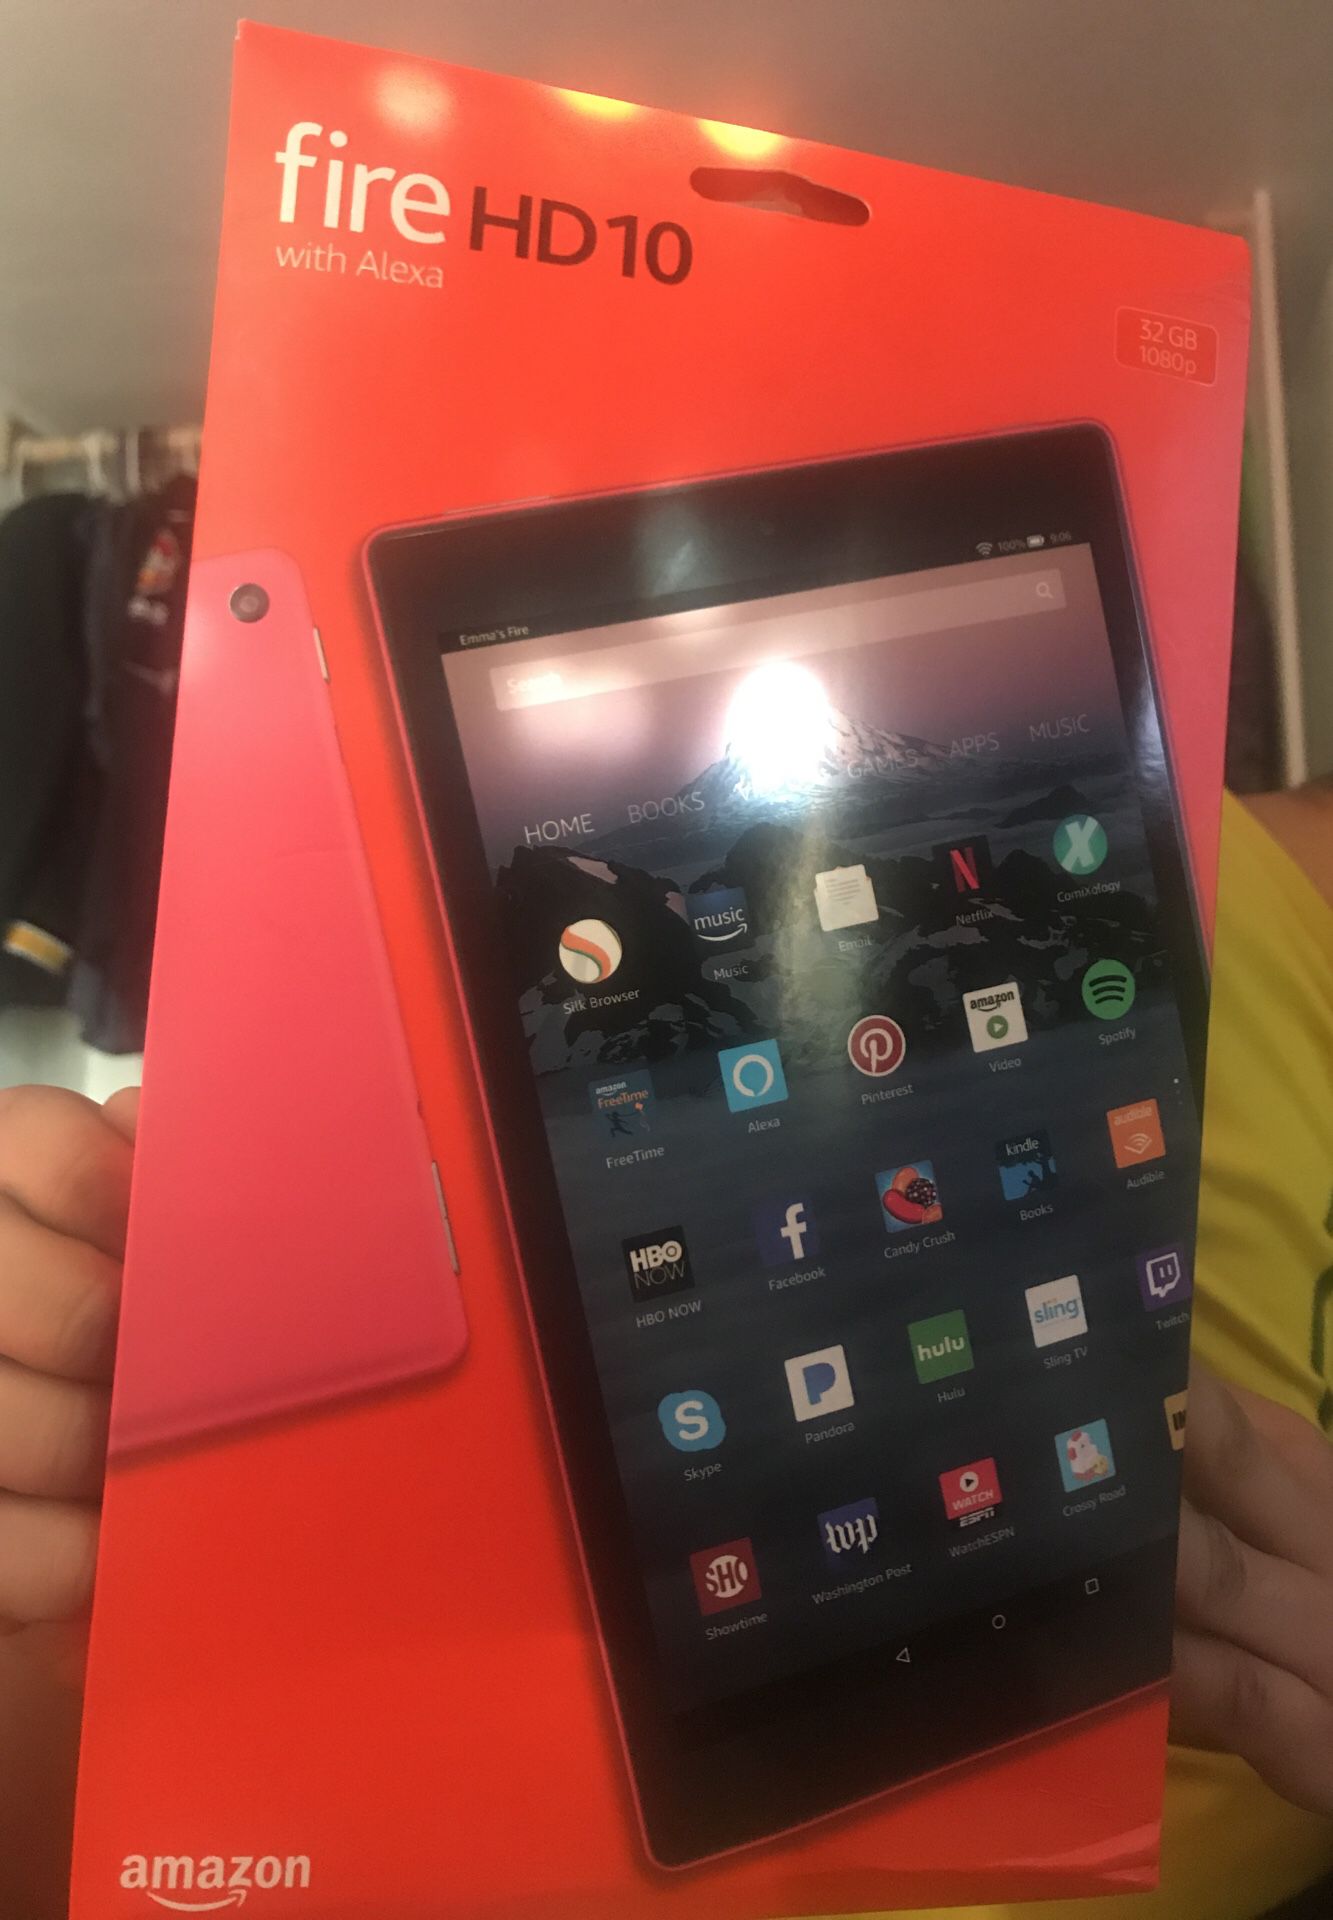 Amazon Fire HD 10 Tablet with Alexa